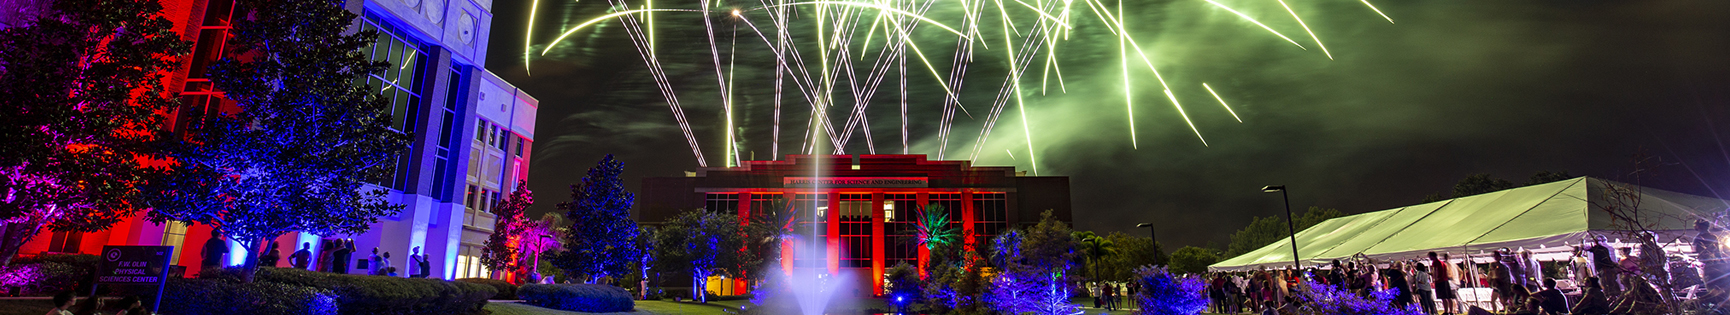 Fireworks over the Campus